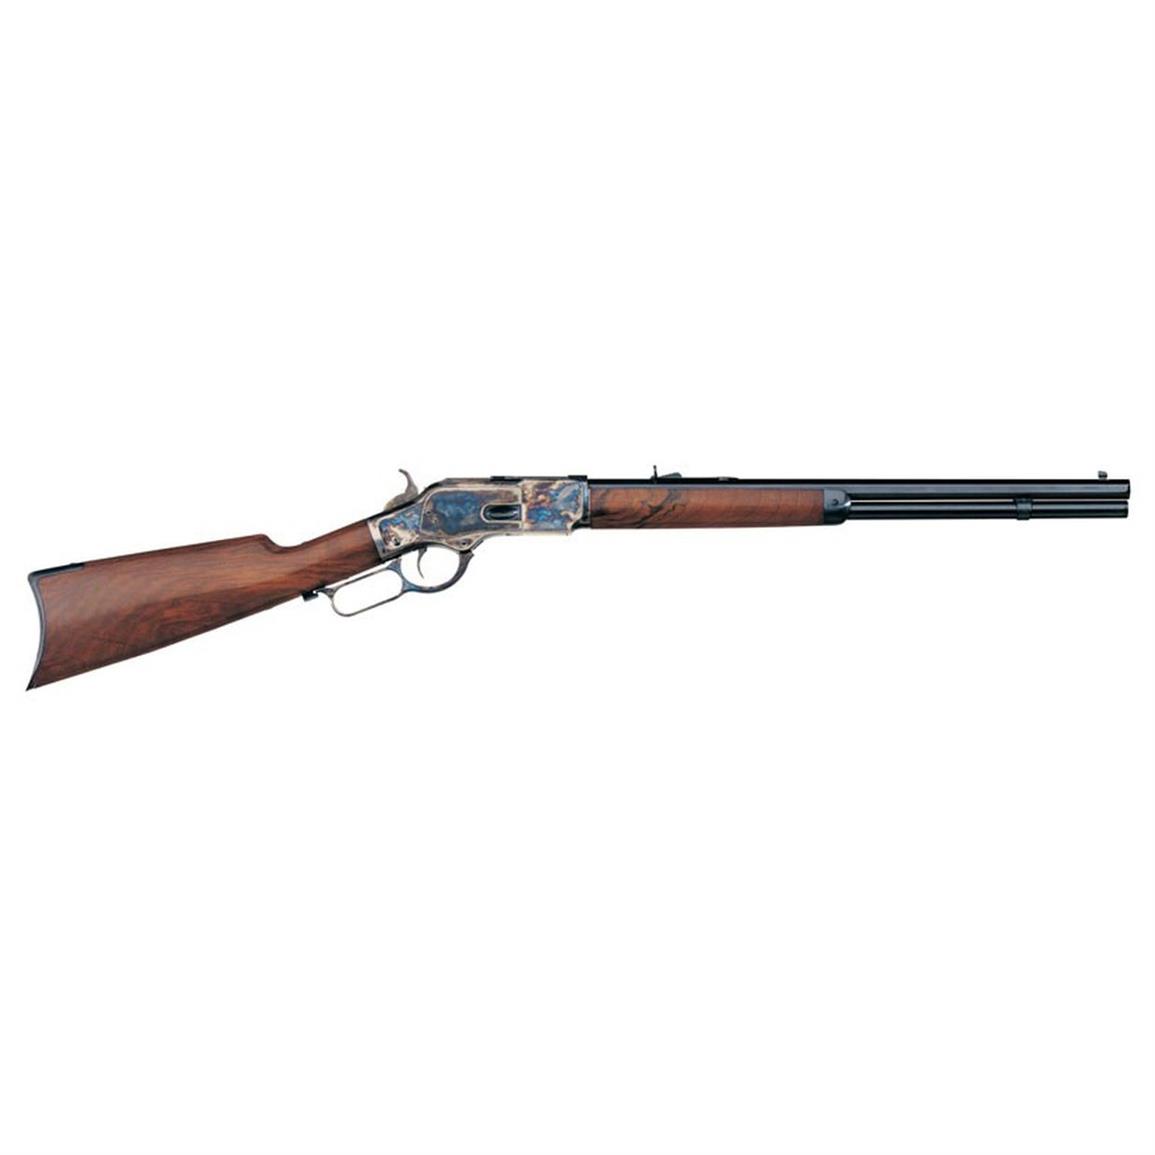 Taylor's & Co. Uberti 1873 Sporting Rifle, Lever Action, .357 Magnum, 20" Barrel, 10 1 Rounds